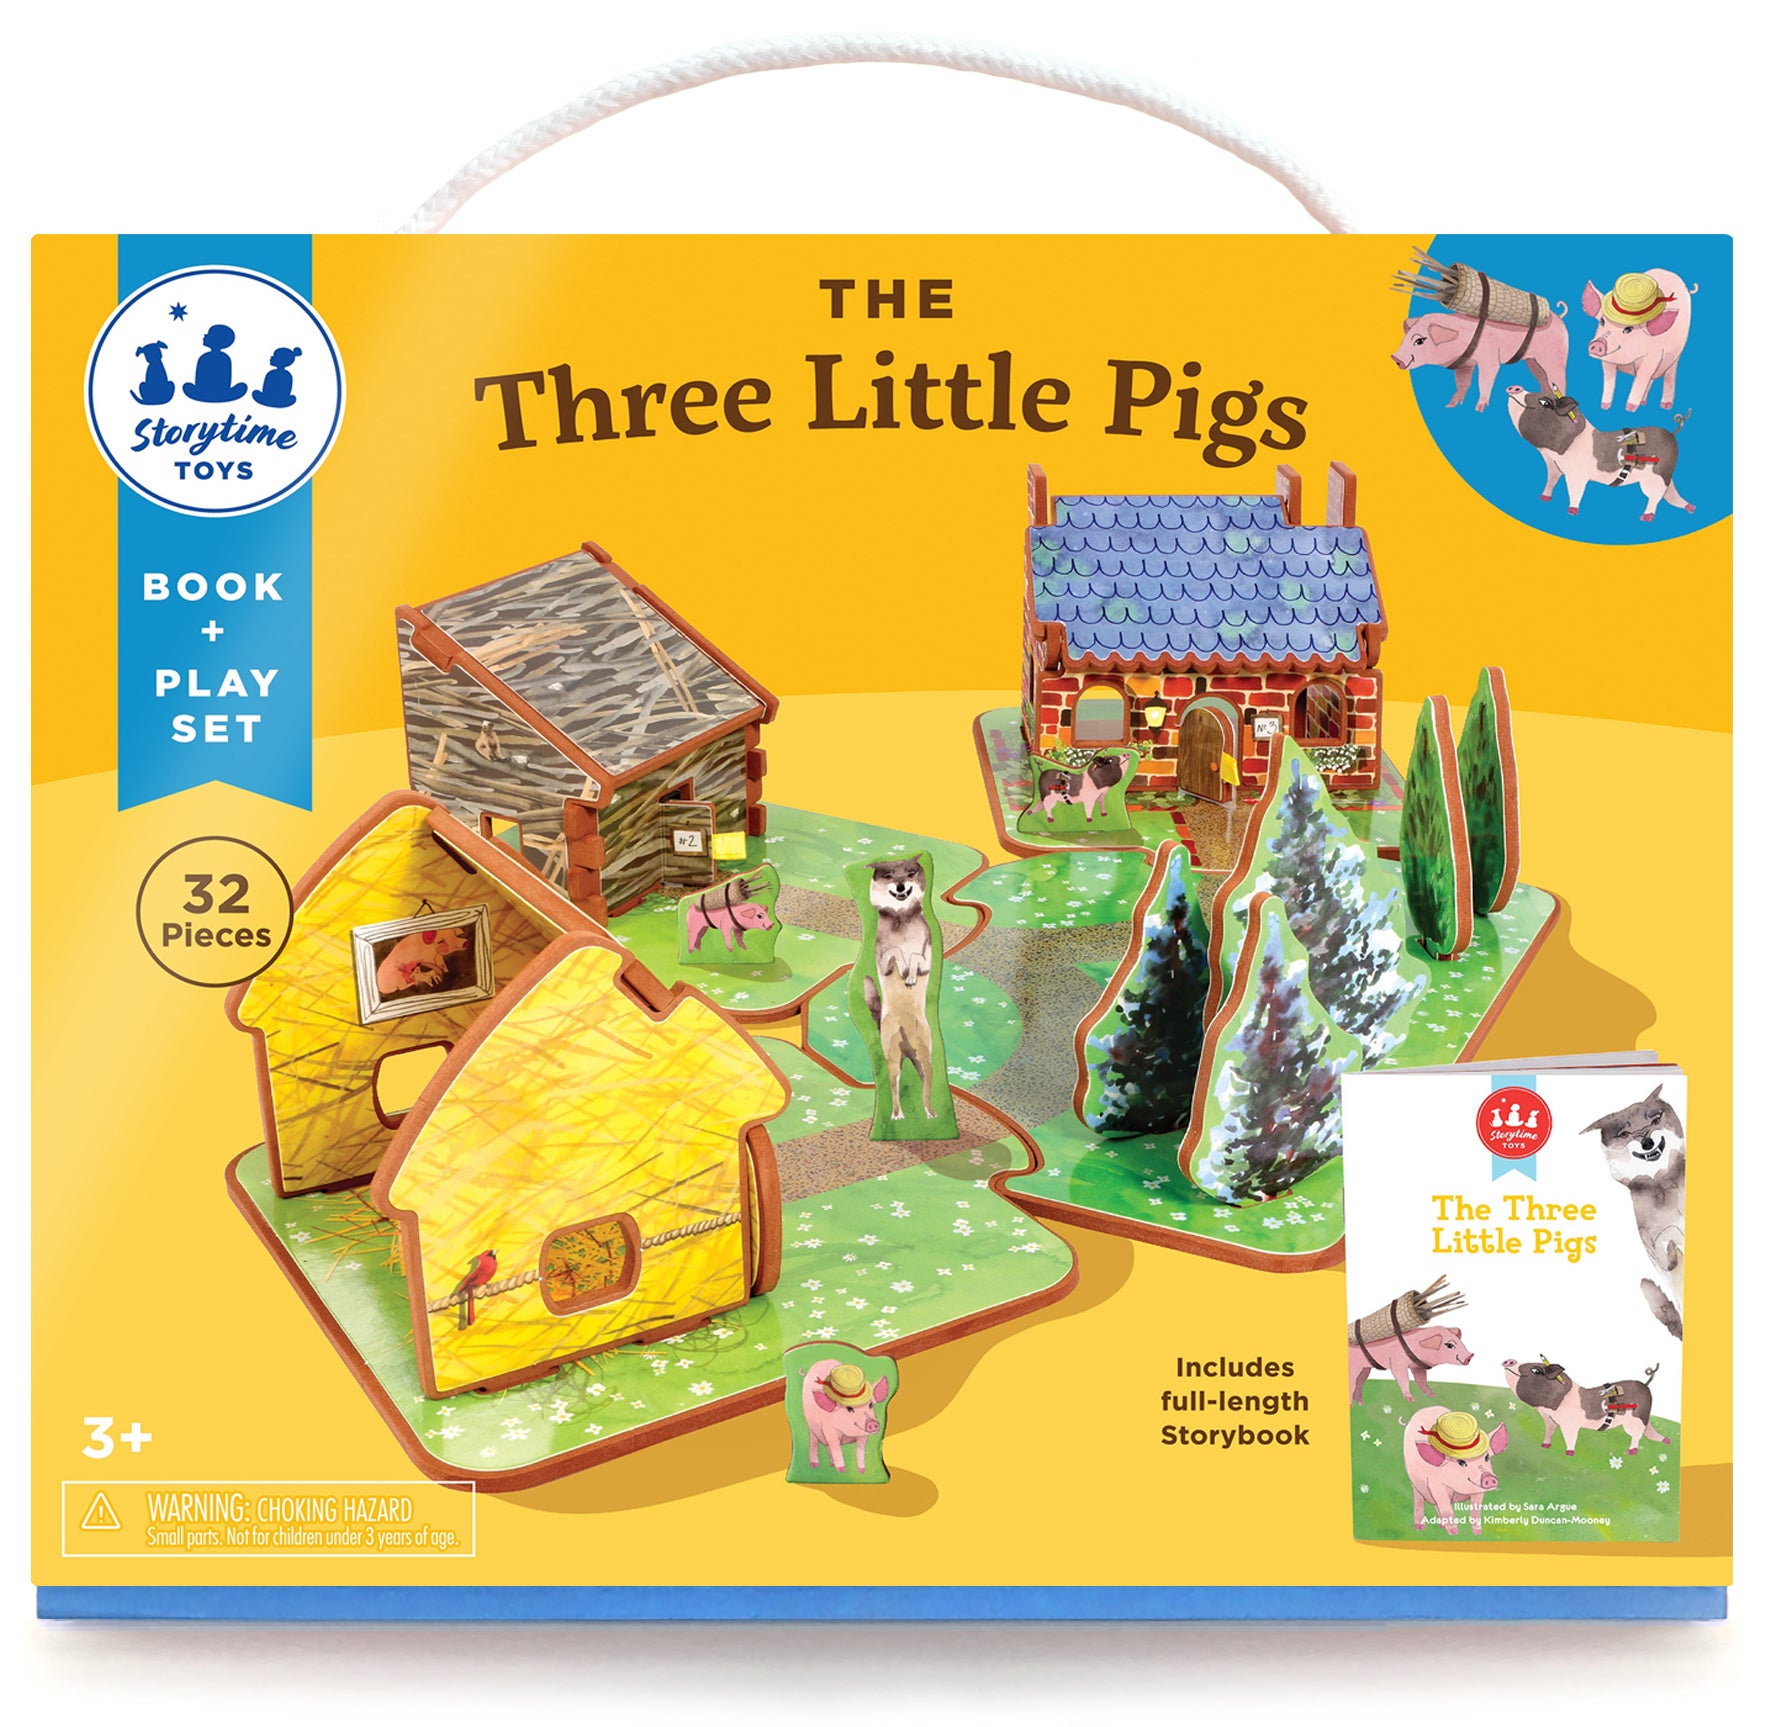 Buy wholesale Farm set, assortment of 2 themes - From 3 years old